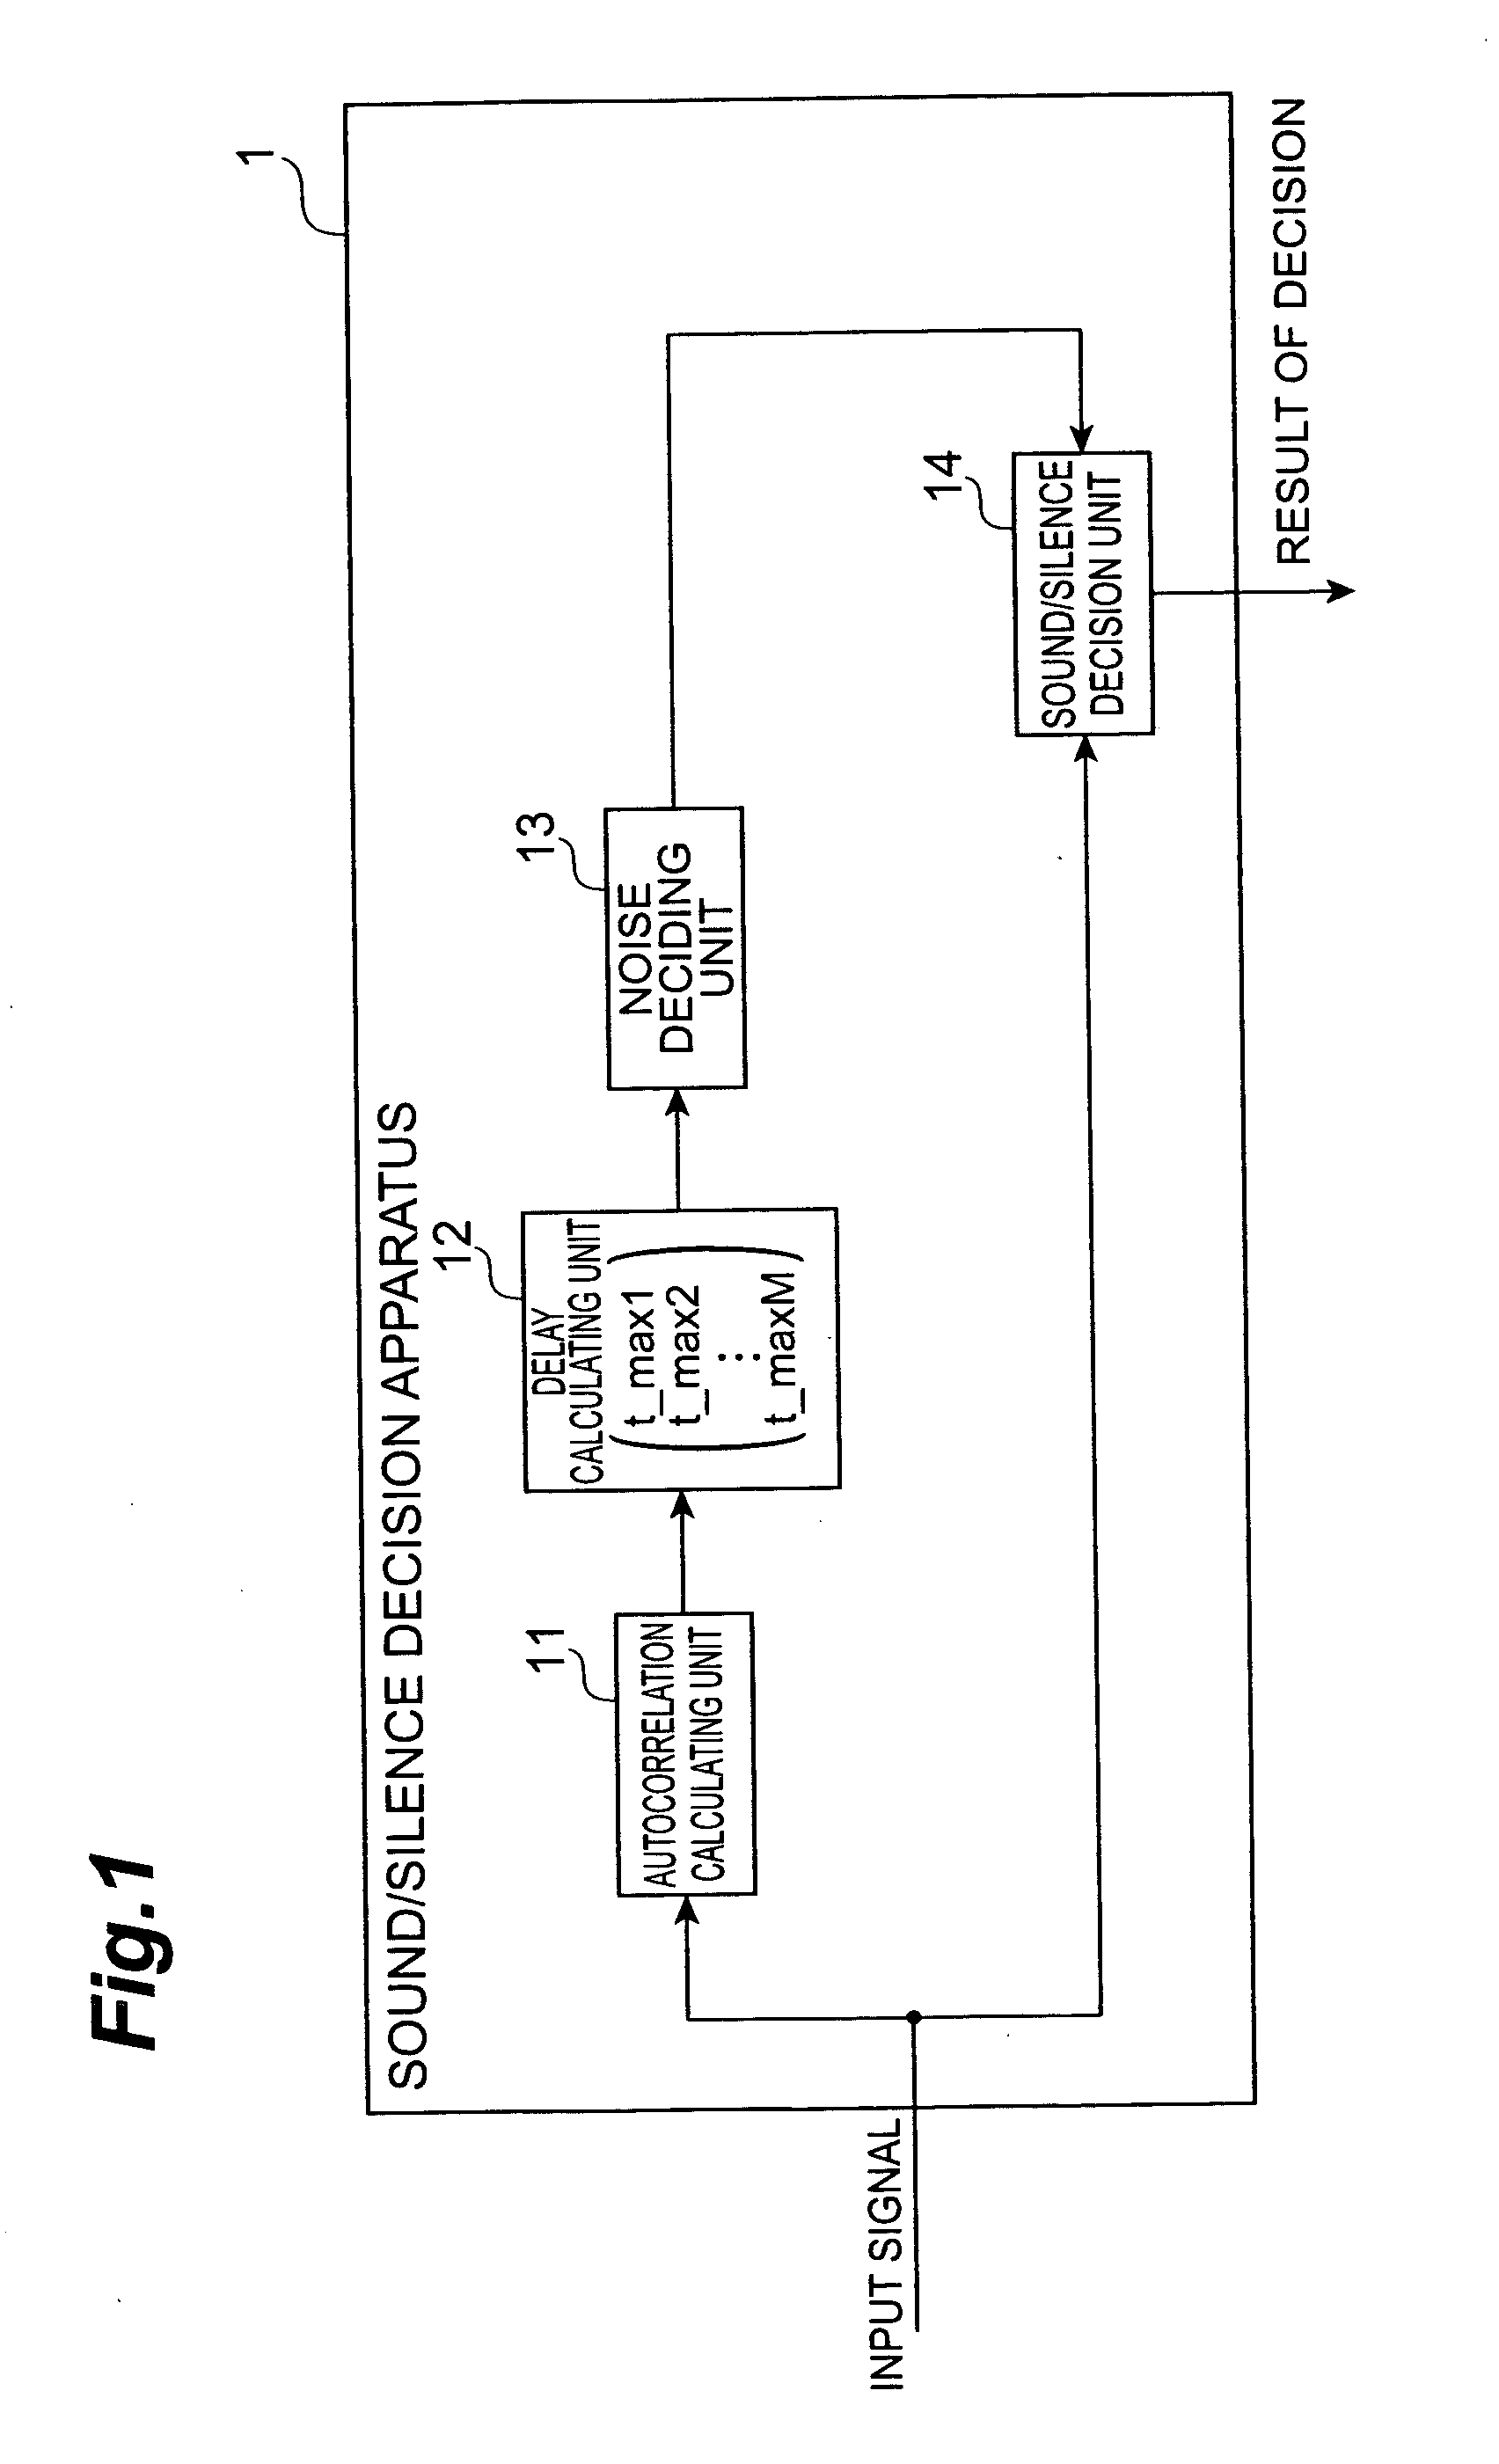 Apparatus and method for voice activity detection